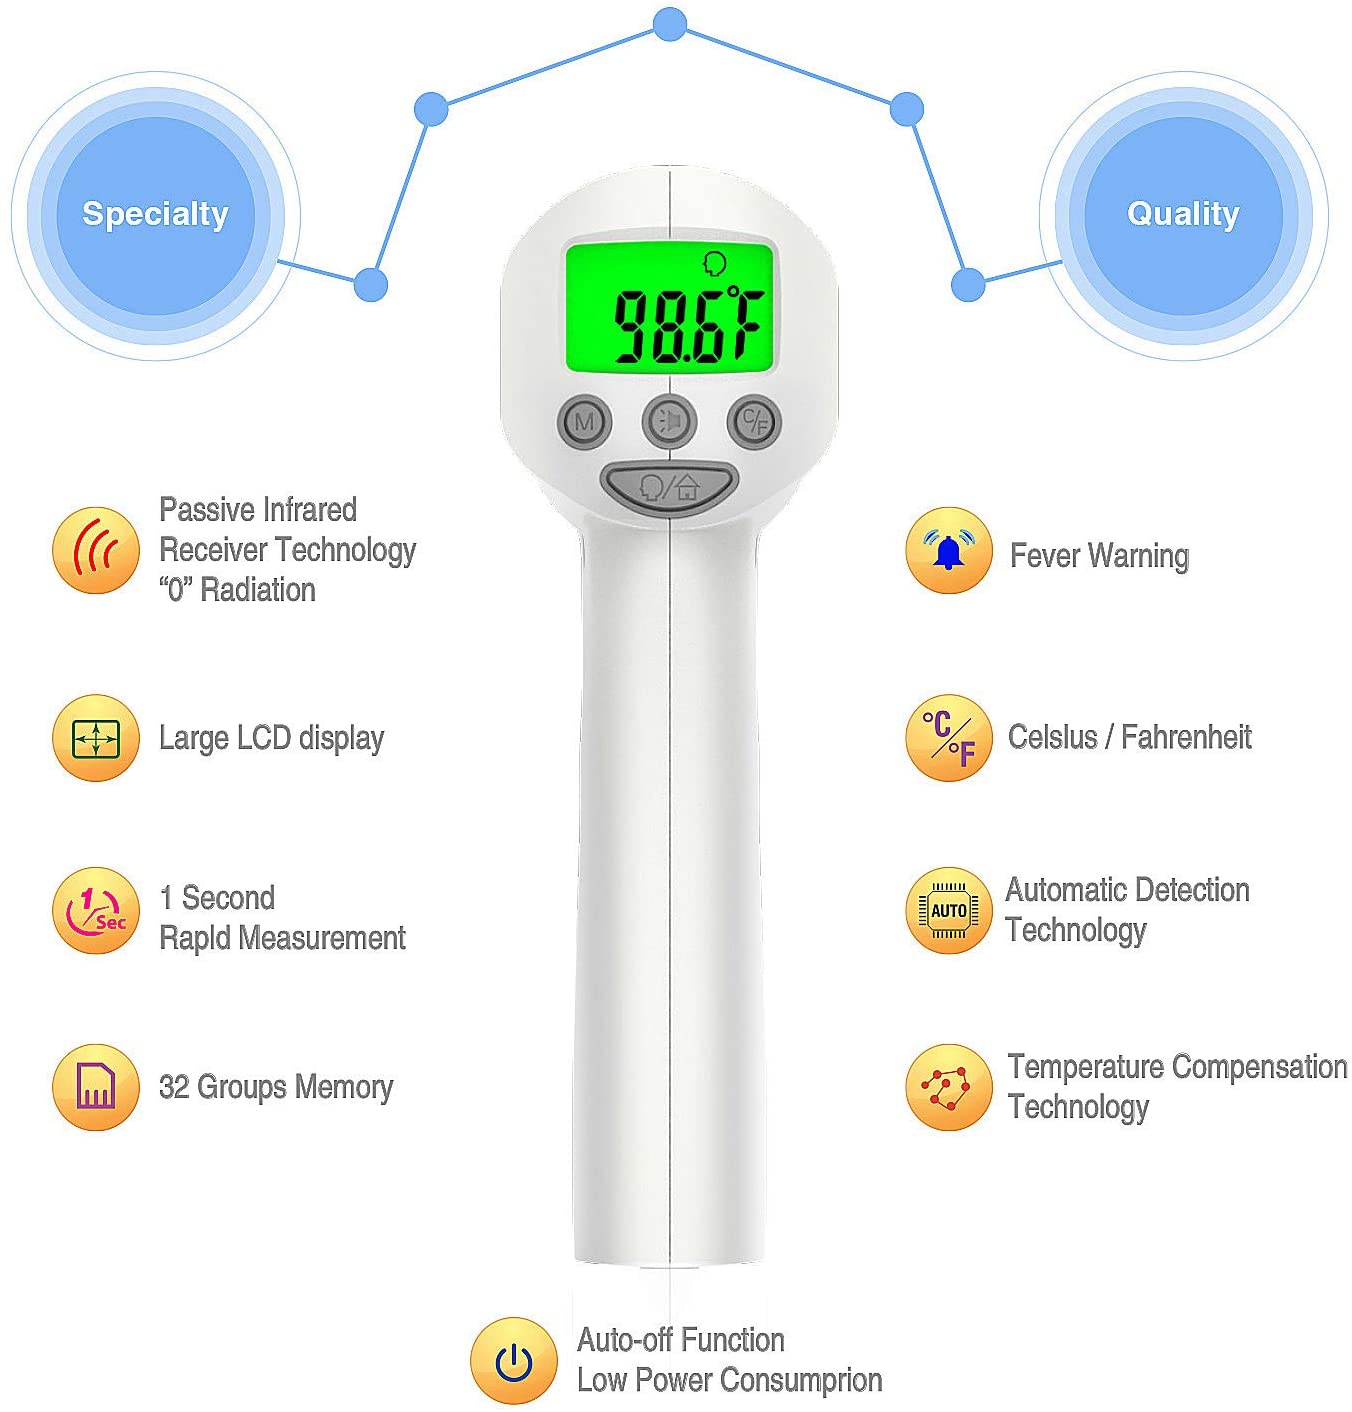 FamiDOC Non-Contact Forehead Thermometer